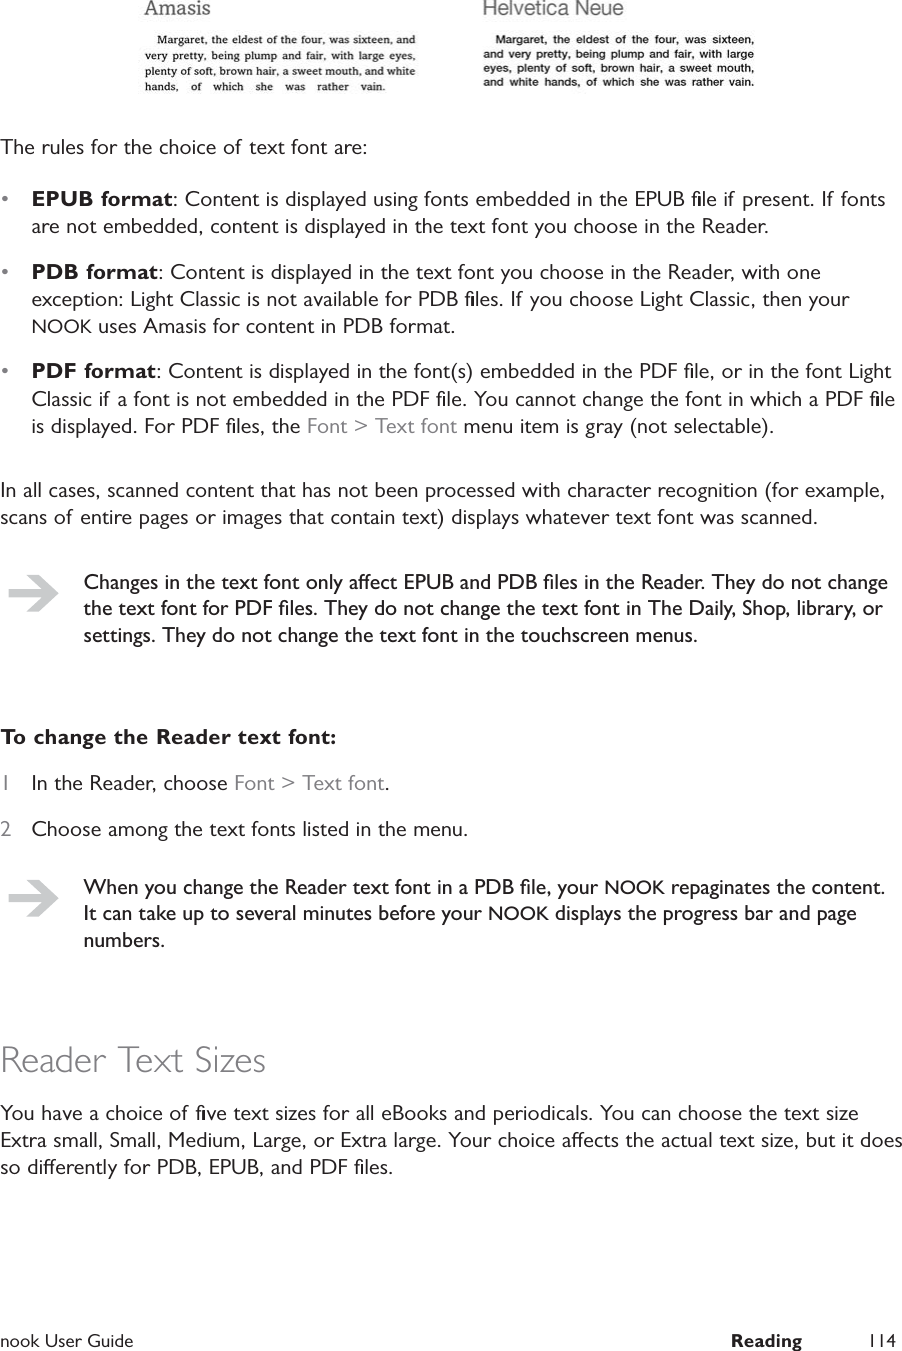  nook User Guide  Reading 114The rules for the choice of text font are:•  EPUB format: Content is displayed using fonts embedded in the EPUB ﬁle if present. If fonts are not embedded, content is displayed in the text font you choose in the Reader.•  PDB format: Content is displayed in the text font you choose in the Reader, with one exception: Light Classic is not available for PDB ﬁles. If you choose Light Classic, then your NOOK uses Amasis for content in PDB format.•  PDF format: Content is displayed in the font(s) embedded in the PDF ﬁle, or in the font Light Classic if a font is not embedded in the PDF ﬁle. You cannot change the font in which a PDF ﬁle is displayed. For PDF ﬁles, the Font &gt; Text font menu item is gray (not selectable).In all cases, scanned content that has not been processed with character recognition (for example, scans of entire pages or images that contain text) displays whatever text font was scanned.Changes in the text font only aect EPUB and PDB ﬁles in the Reader. They do not change the text font for PDF ﬁles. They do not change the text font in The Daily, Shop, library, or settings. They do not change the text font in the touchscreen menus.To change the Reader text font:1  In the Reader, choose Font &gt; Text font.2  Choose among the text fonts listed in the menu. When you change the Reader text font in a PDB ﬁle, your NOOK repaginates the content. It can take up to several minutes before your NOOK displays the progress bar and page numbers.Reader Text SizesYou have a choice of ﬁve text sizes for all eBooks and periodicals. You can choose the text size Extra small, Small, Medium, Large, or Extra large. Your choice aects the actual text size, but it does so dierently for PDB, EPUB, and PDF ﬁles.